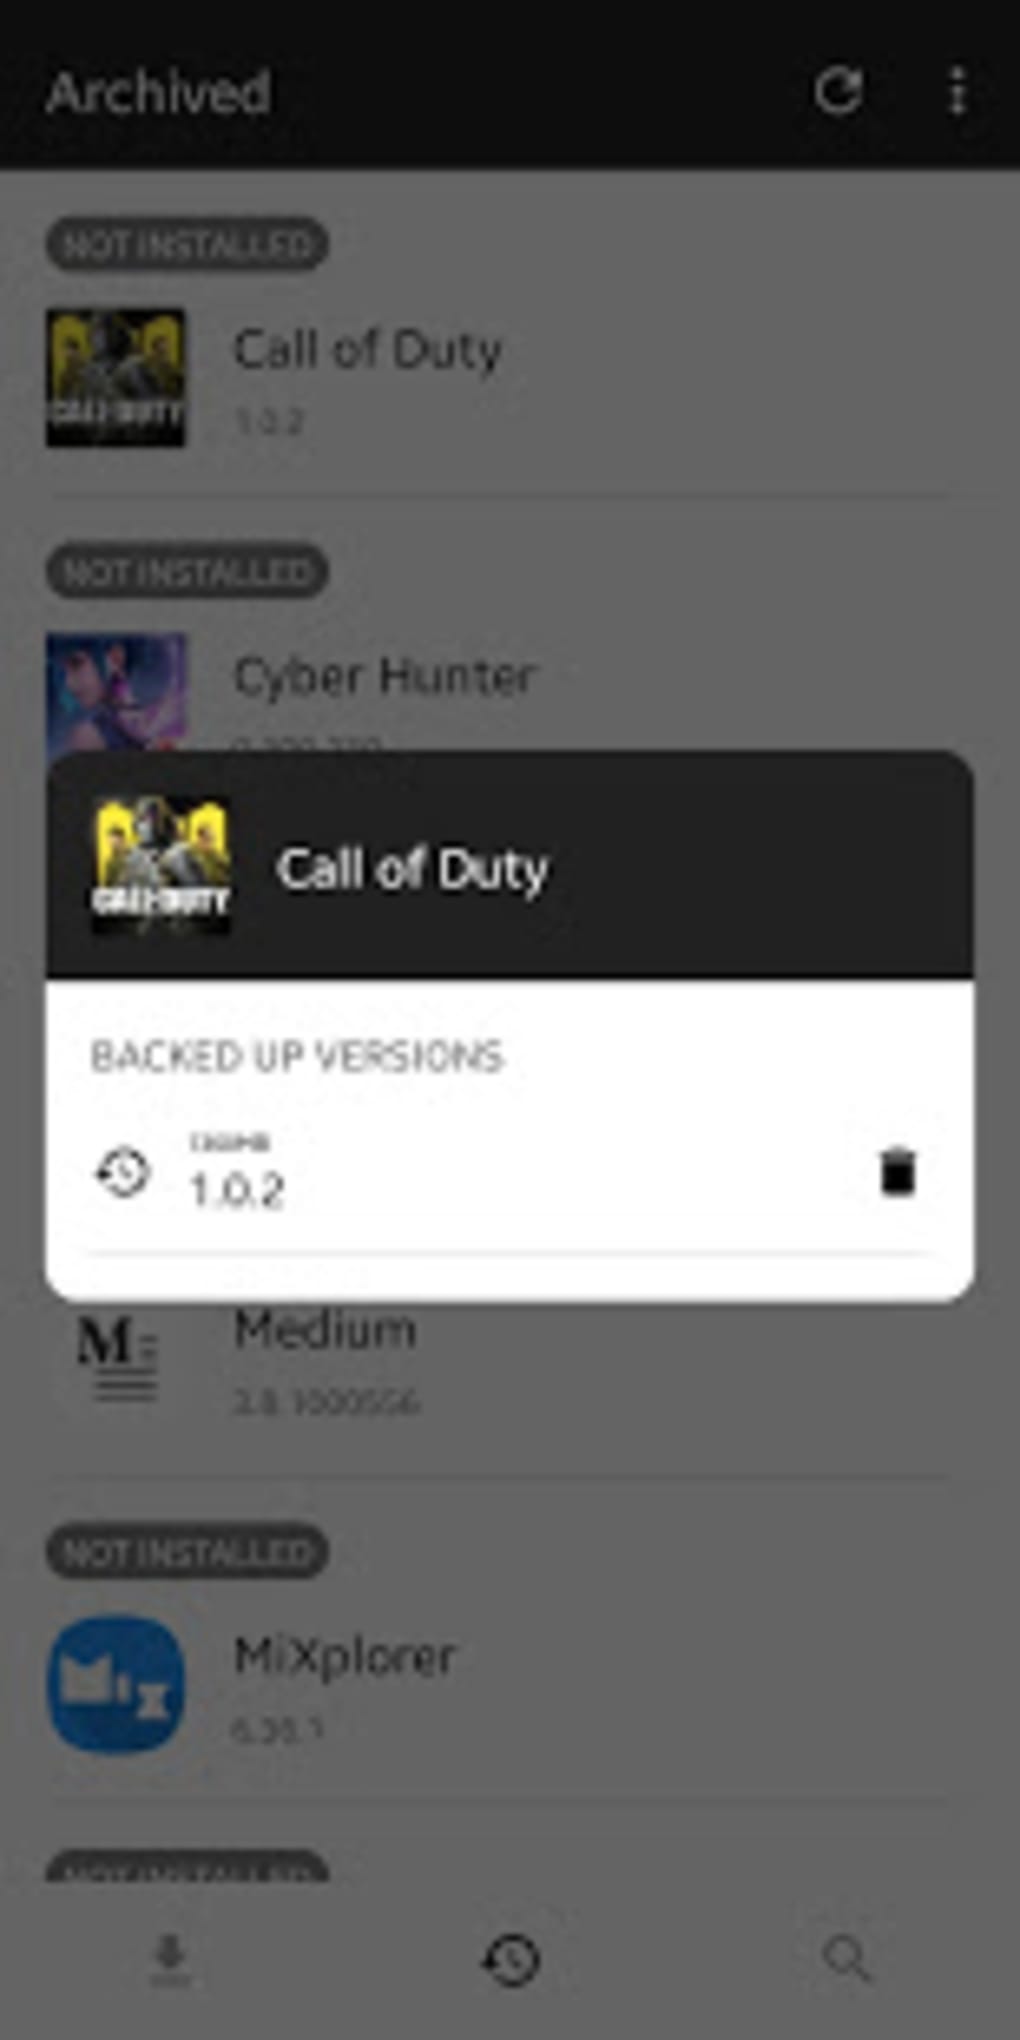 Download Call of Duty Mobile 1.0.2 APK+OBB on Android